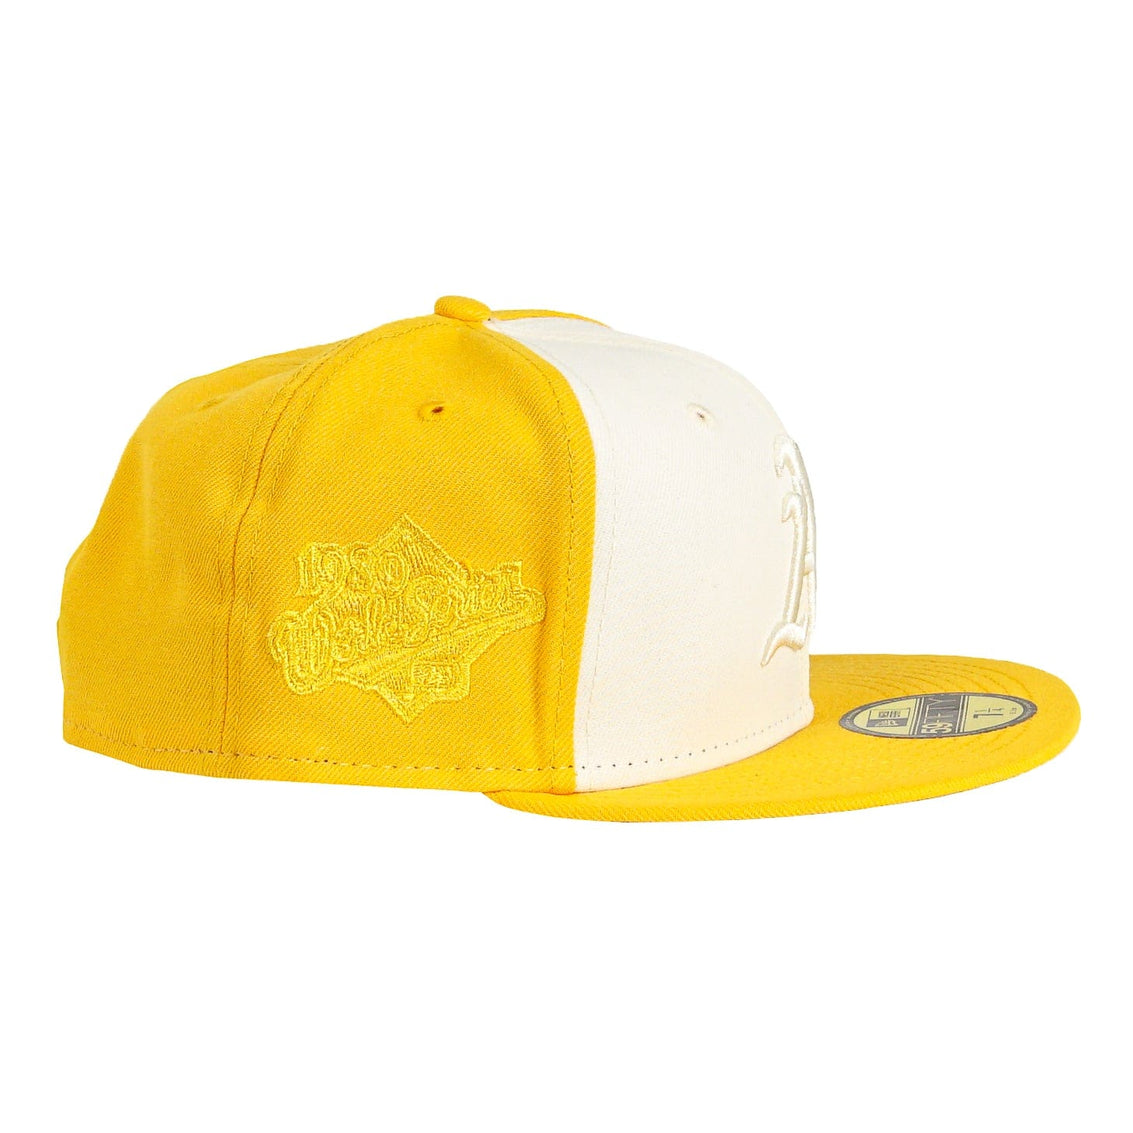 Oakland Athletics Tonal 2-Tone 59Fifty Fitted Hat in yellow and cream